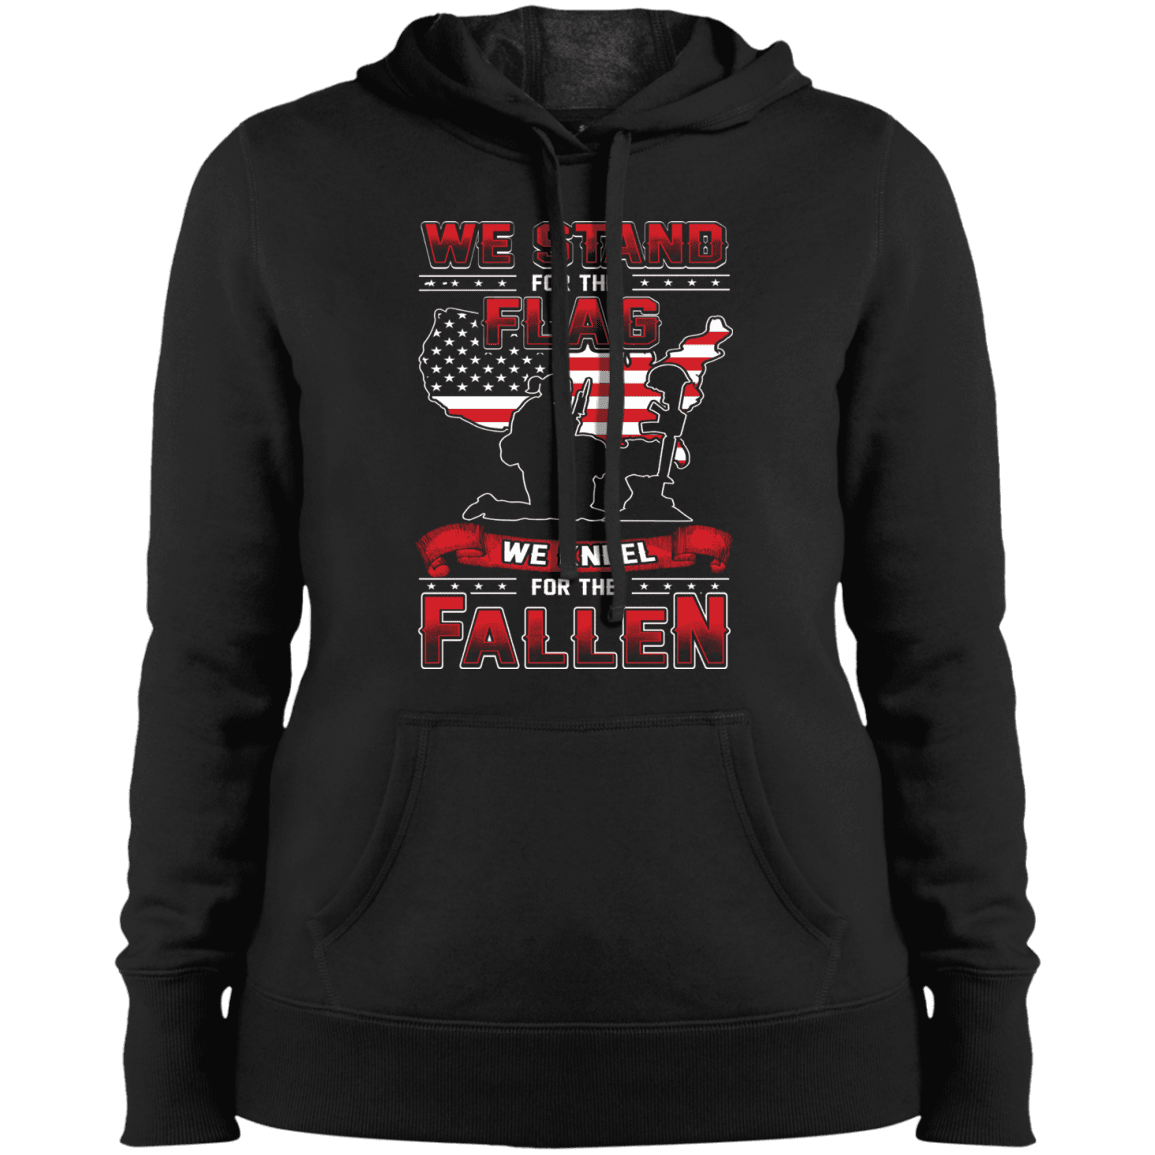 Military T-Shirt "We Stand For The Flag Knell For The Fallen Female Veteran" Front-TShirt-General-Veterans Nation